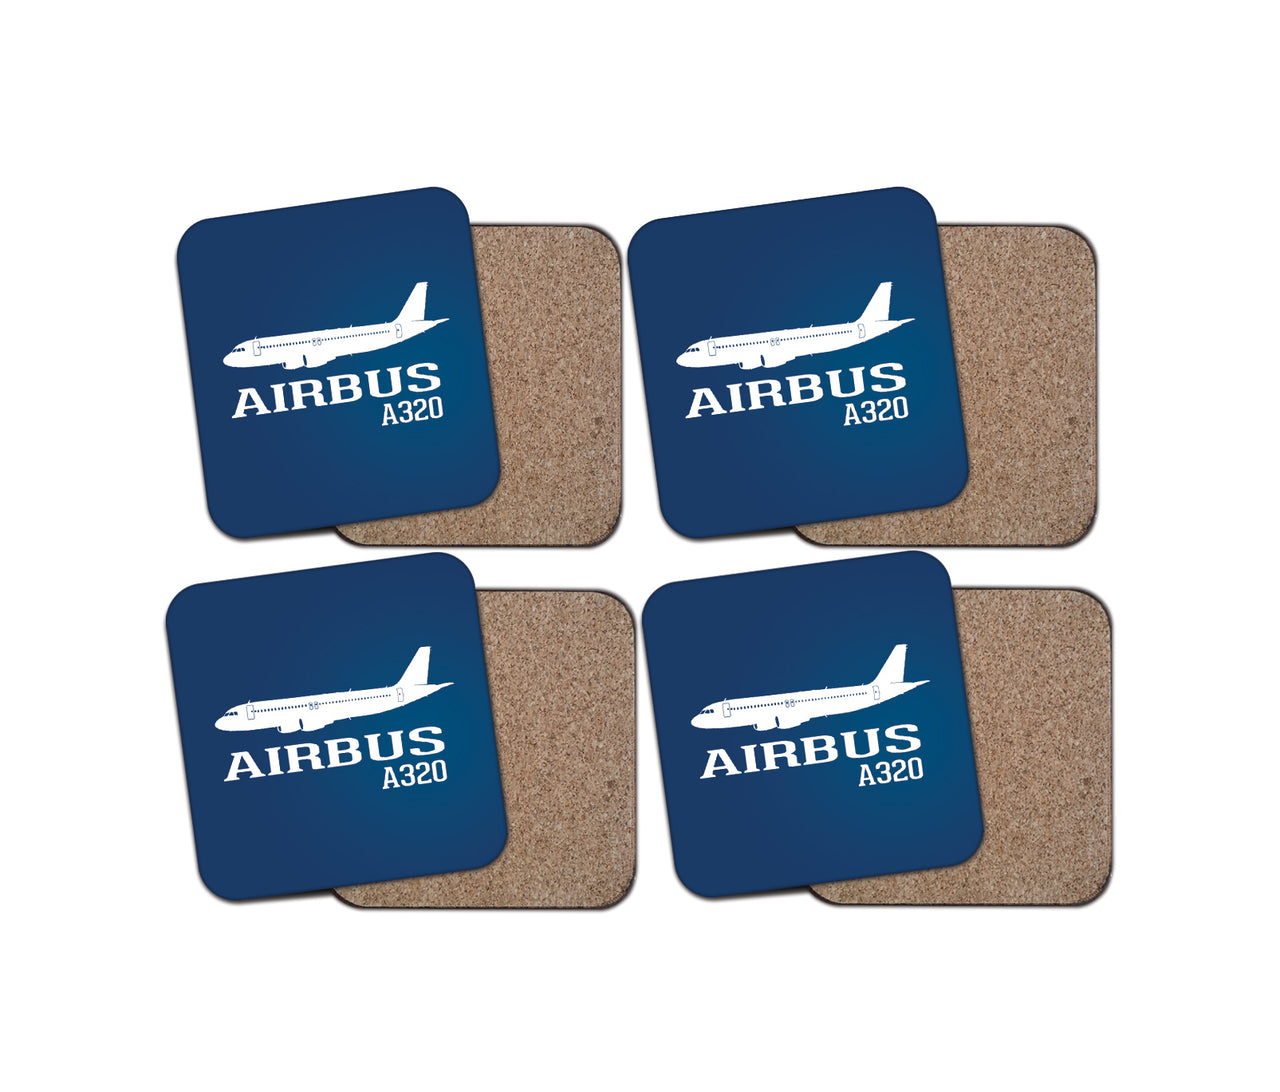 Airbus A320 Printed Designed Coasters